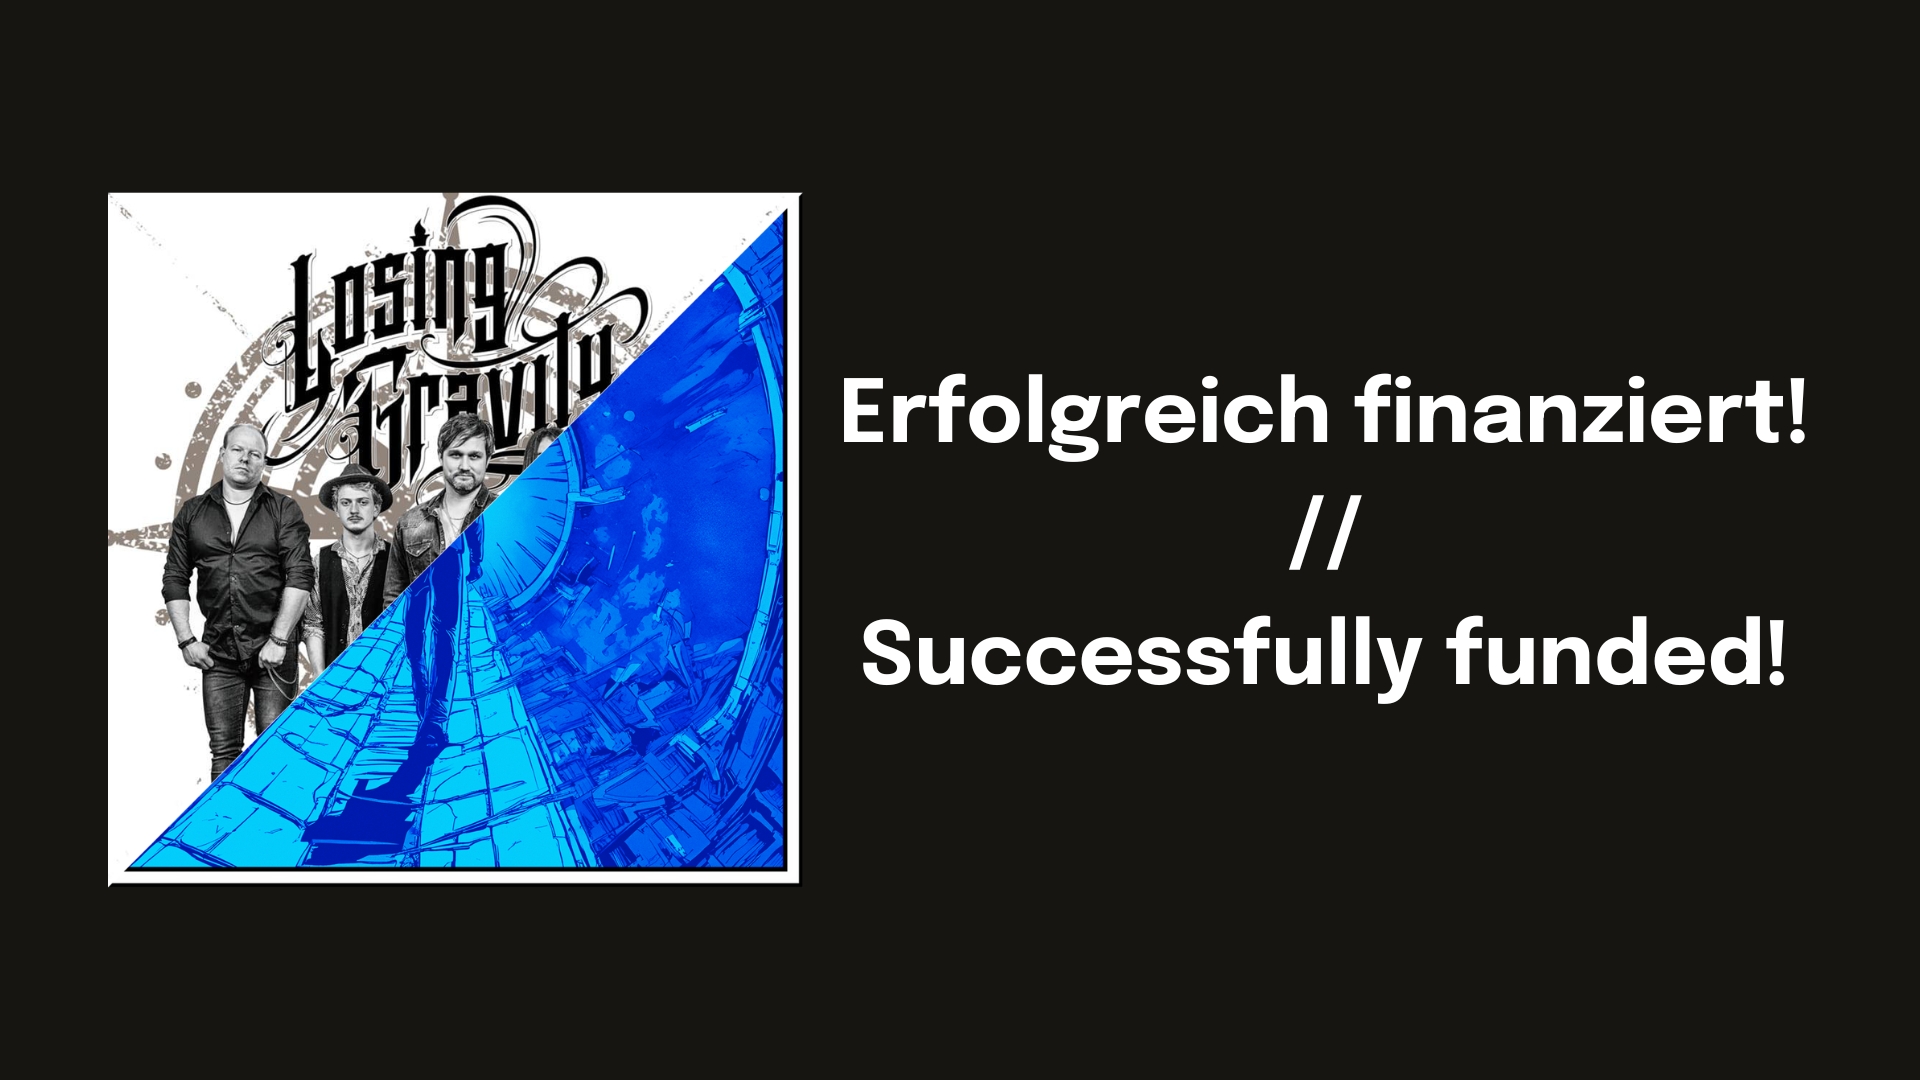 Zwei Projekte erfolgreich finanziert! // Two projects successfully funded!